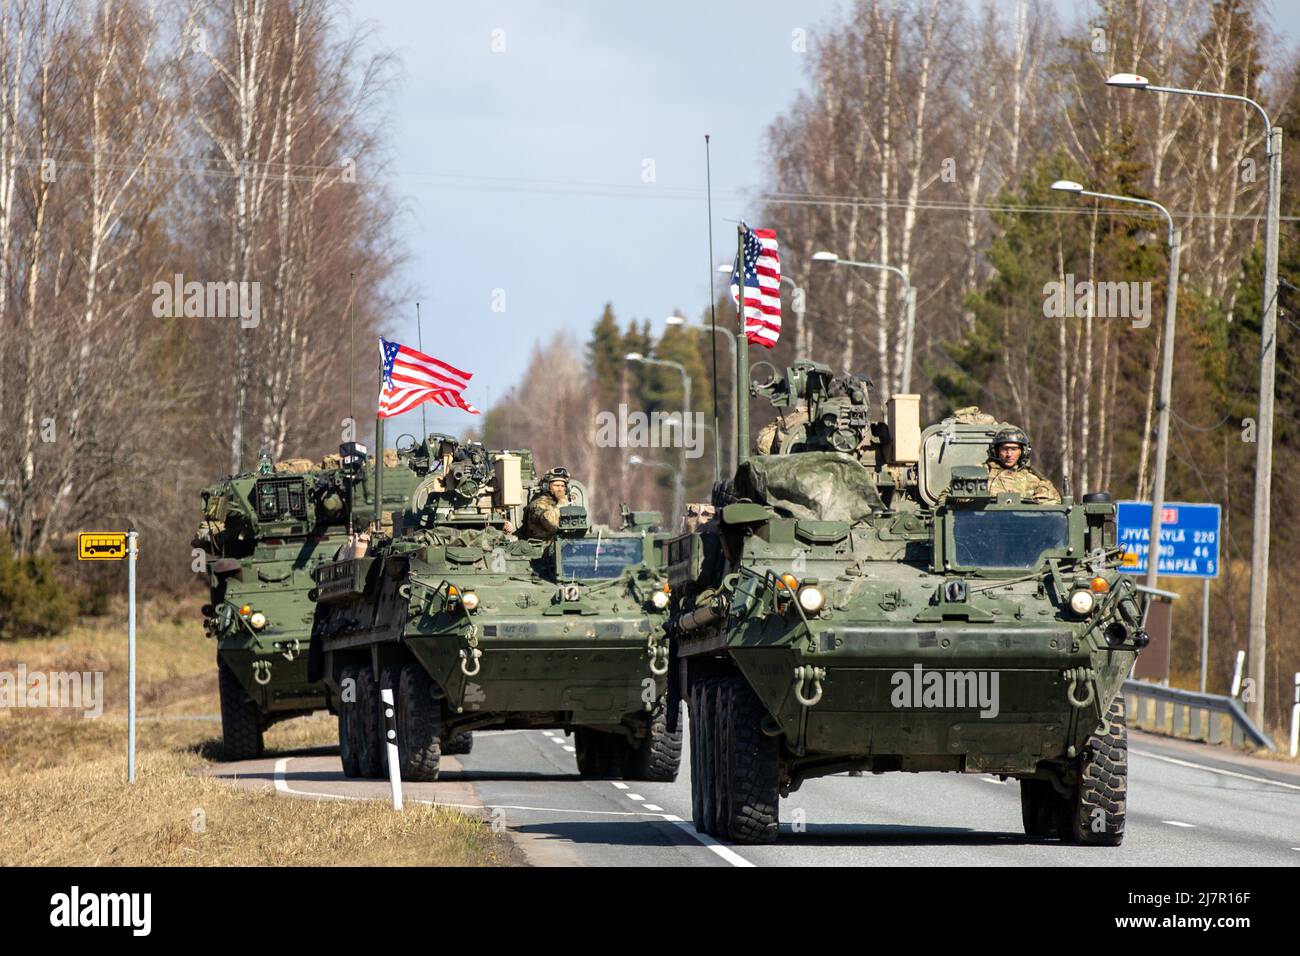 U.S. Army Capt. Denis Majewski, Outlaw Troop Commander assigned to 4th Squadron, 2d Cavalry Regiment, leads his convoy in a tactical road march from Niinisalo Training Area, Finland, May 8, 2022. Exercise Arrow is an annual, pre-planned, multinational exercise taking place in Finland, where visiting forces to include the U.S., U.K., Latvia, and Estonia, train together with the Finnish Defense Forces in high intensity force-on-force engagements and a live fire exercise with the purpose of increasing military readiness and developing interoperability among participating partner nations. (U.S. Ar Stock Photo